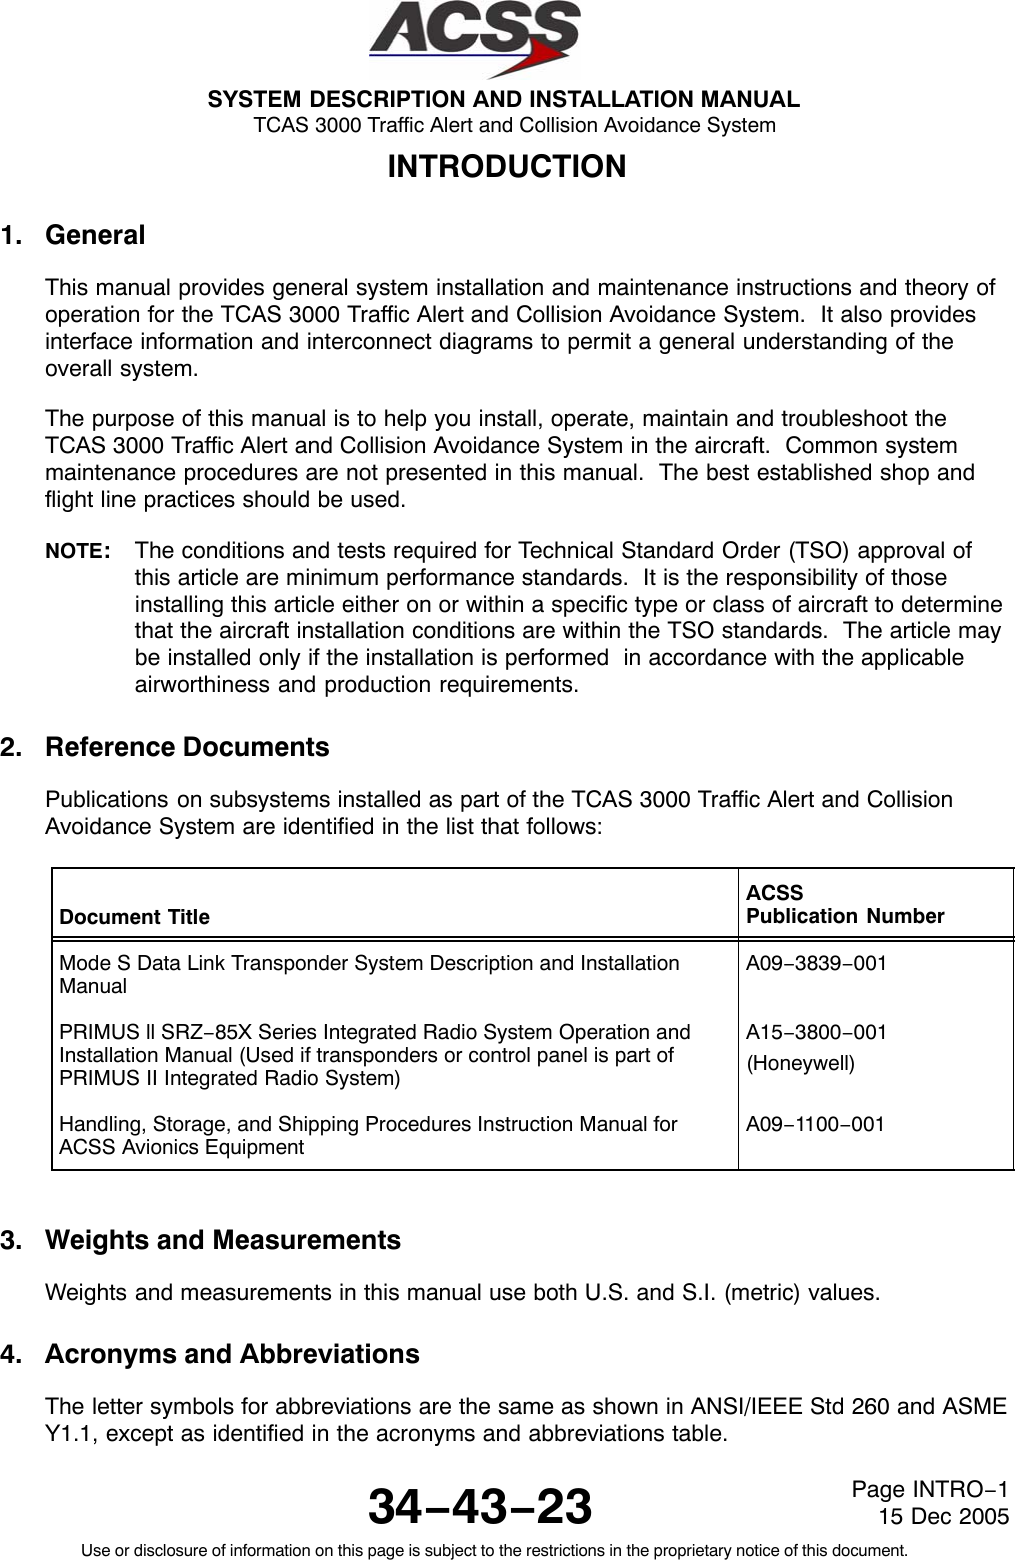 SYSTEM DESCRIPTION AND INSTALLATION MANUAL TCAS 3000 Traffic Alert and Collision Avoidance System34−43−23Use or disclosure of information on this page is subject to the restrictions in the proprietary notice of this document.Page INTRO−115 Dec 2005INTRODUCTION1. GeneralThis manual provides general system installation and maintenance instructions and theory ofoperation for the TCAS 3000 Traffic Alert and Collision Avoidance System.  It also providesinterface information and interconnect diagrams to permit a general understanding of theoverall system.The purpose of this manual is to help you install, operate, maintain and troubleshoot theTCAS 3000 Traffic Alert and Collision Avoidance System in the aircraft.  Common systemmaintenance procedures are not presented in this manual.  The best established shop andflight line practices should be used.NOTE:The conditions and tests required for Technical Standard Order (TSO) approval ofthis article are minimum performance standards.  It is the responsibility of thoseinstalling this article either on or within a specific type or class of aircraft to determinethat the aircraft installation conditions are within the TSO standards.  The article maybe installed only if the installation is performed  in accordance with the applicableairworthiness and production requirements.2. Reference DocumentsPublications on subsystems installed as part of the TCAS 3000 Traffic Alert and CollisionAvoidance System are identified in the list that follows:Document TitleACSSPublication NumberMode S Data Link Transponder System Description and InstallationManualA09−3839−001PRIMUS ll SRZ−85X Series Integrated Radio System Operation andInstallation Manual (Used if transponders or control panel is part ofPRIMUS II Integrated Radio System)A15−3800−001(Honeywell)Handling, Storage, and Shipping Procedures Instruction Manual forACSS Avionics EquipmentA09−1100−0013. Weights and MeasurementsWeights and measurements in this manual use both U.S. and S.I. (metric) values.4. Acronyms and AbbreviationsThe letter symbols for abbreviations are the same as shown in ANSI/IEEE Std 260 and ASMEY1.1, except as identified in the acronyms and abbreviations table.